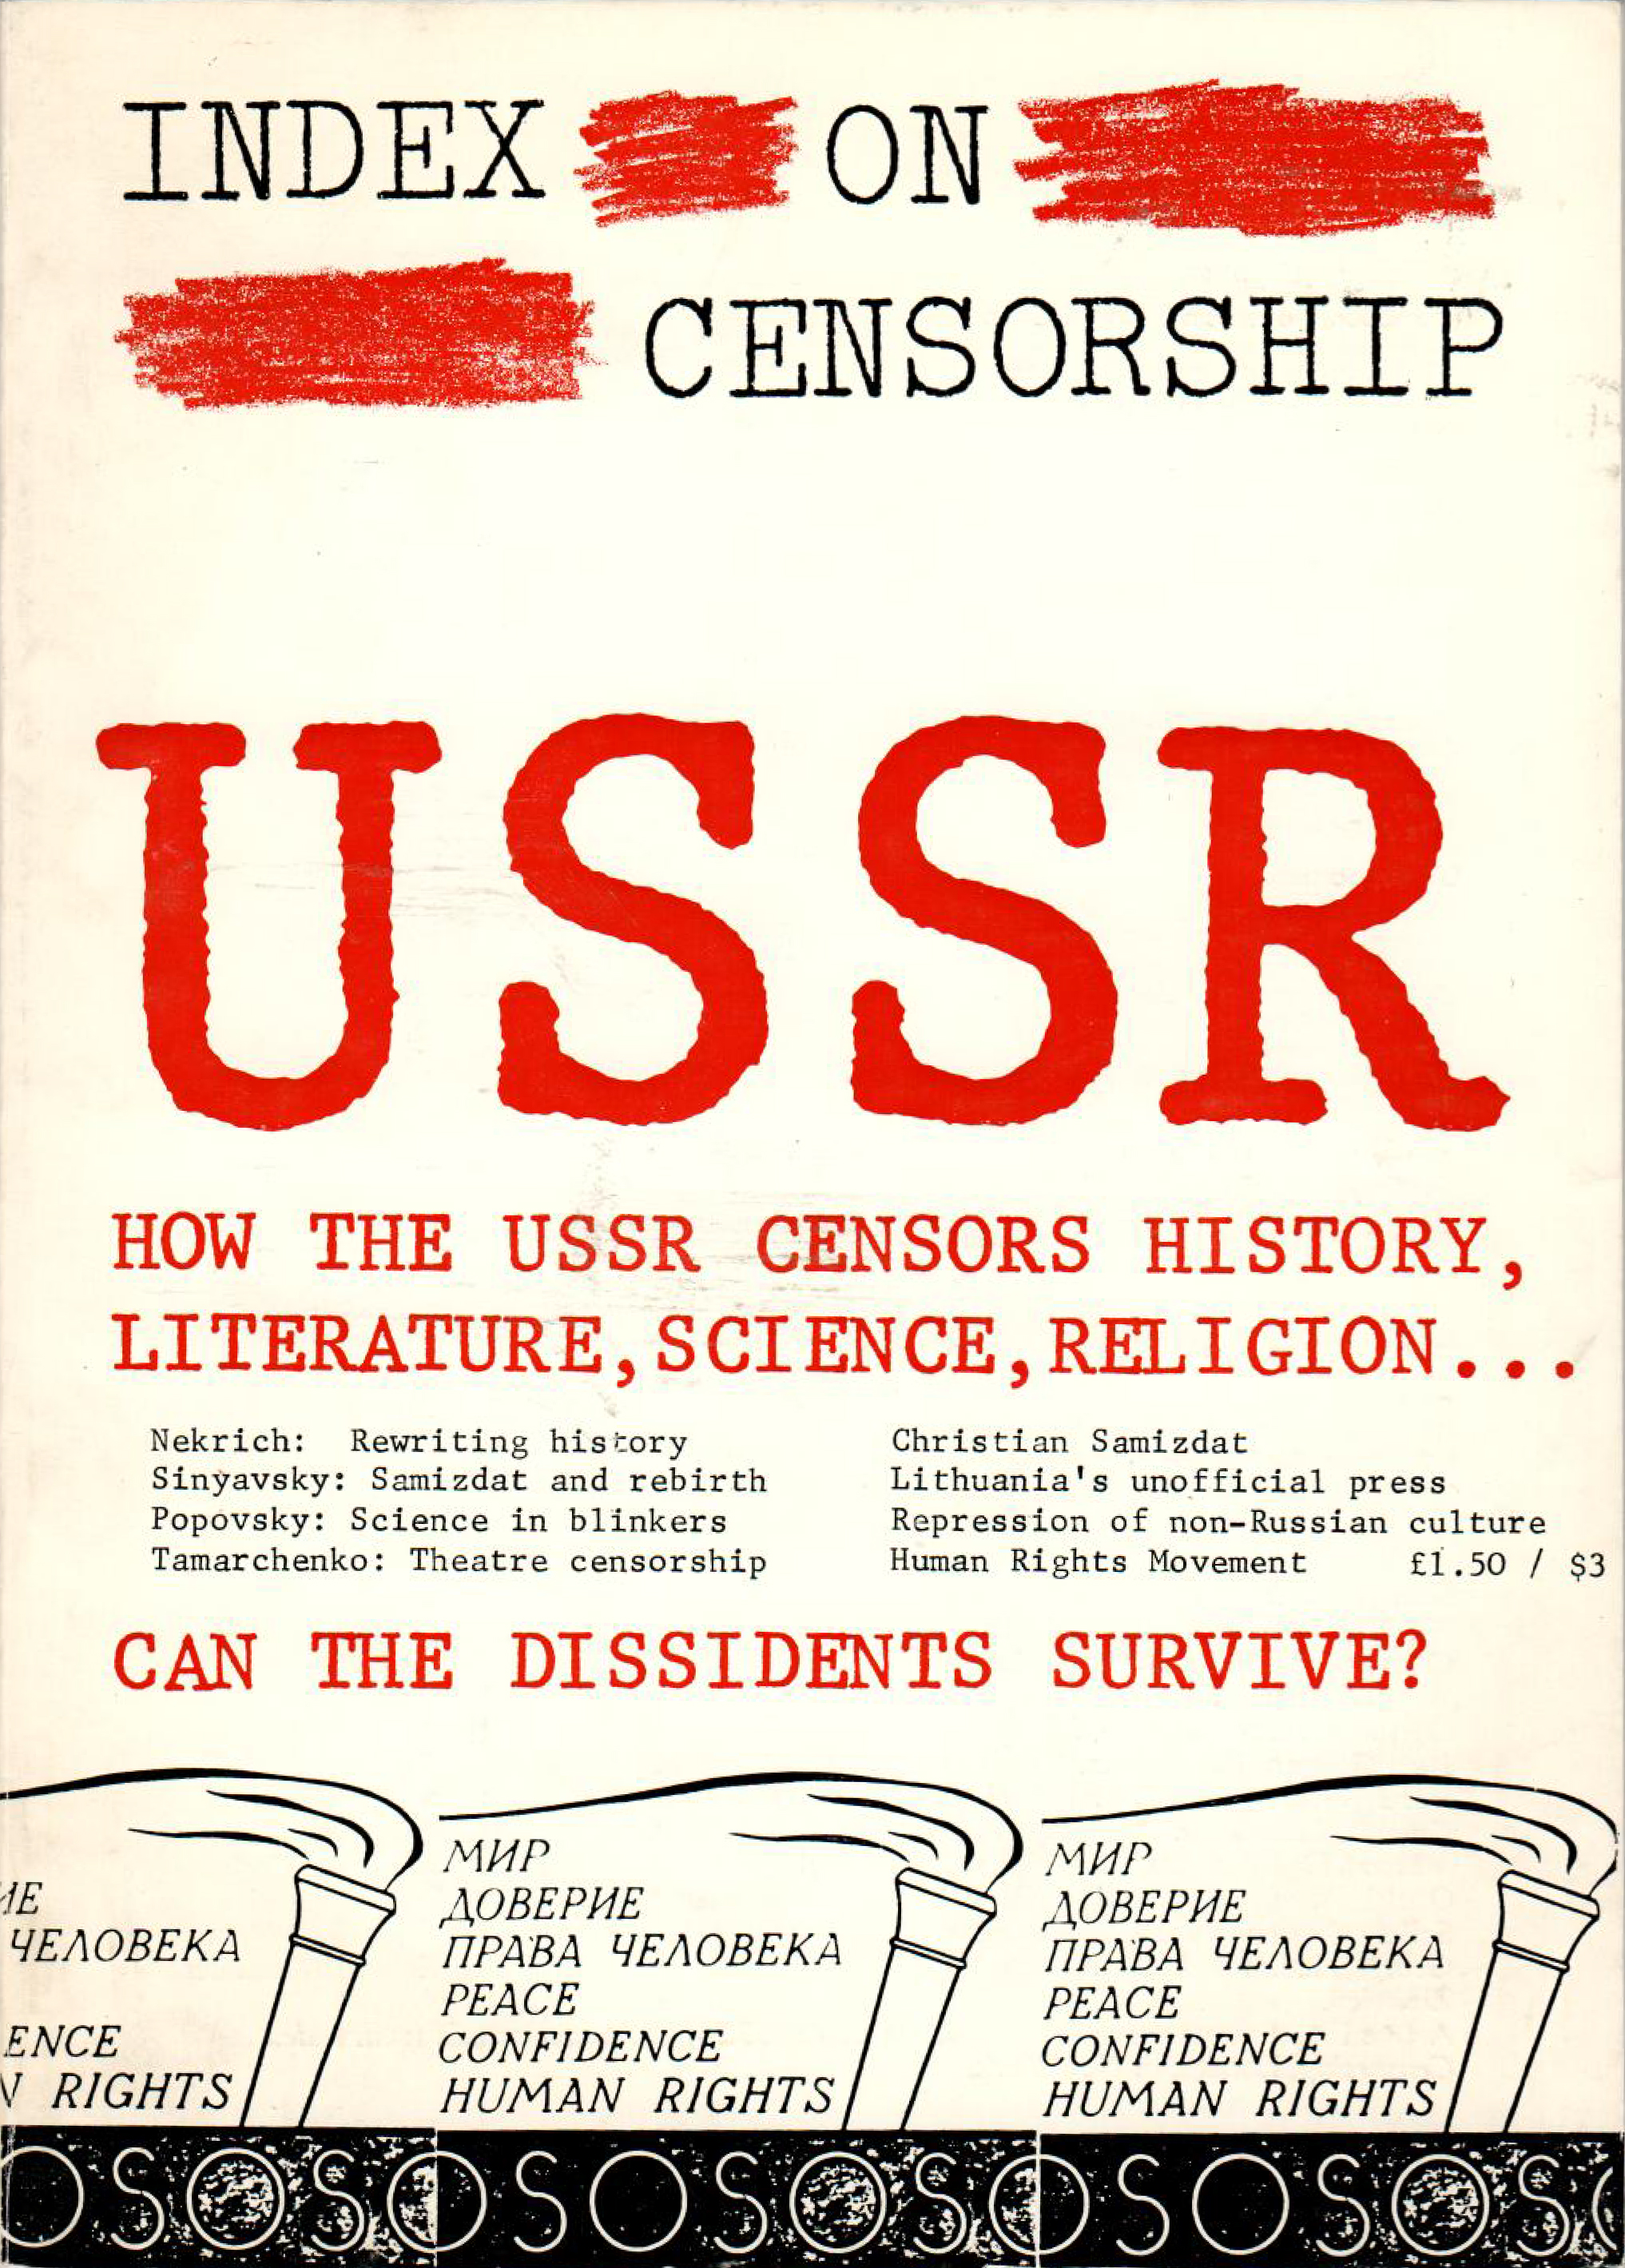 USSR, the August 1980 issue of Index on Censorship magazine